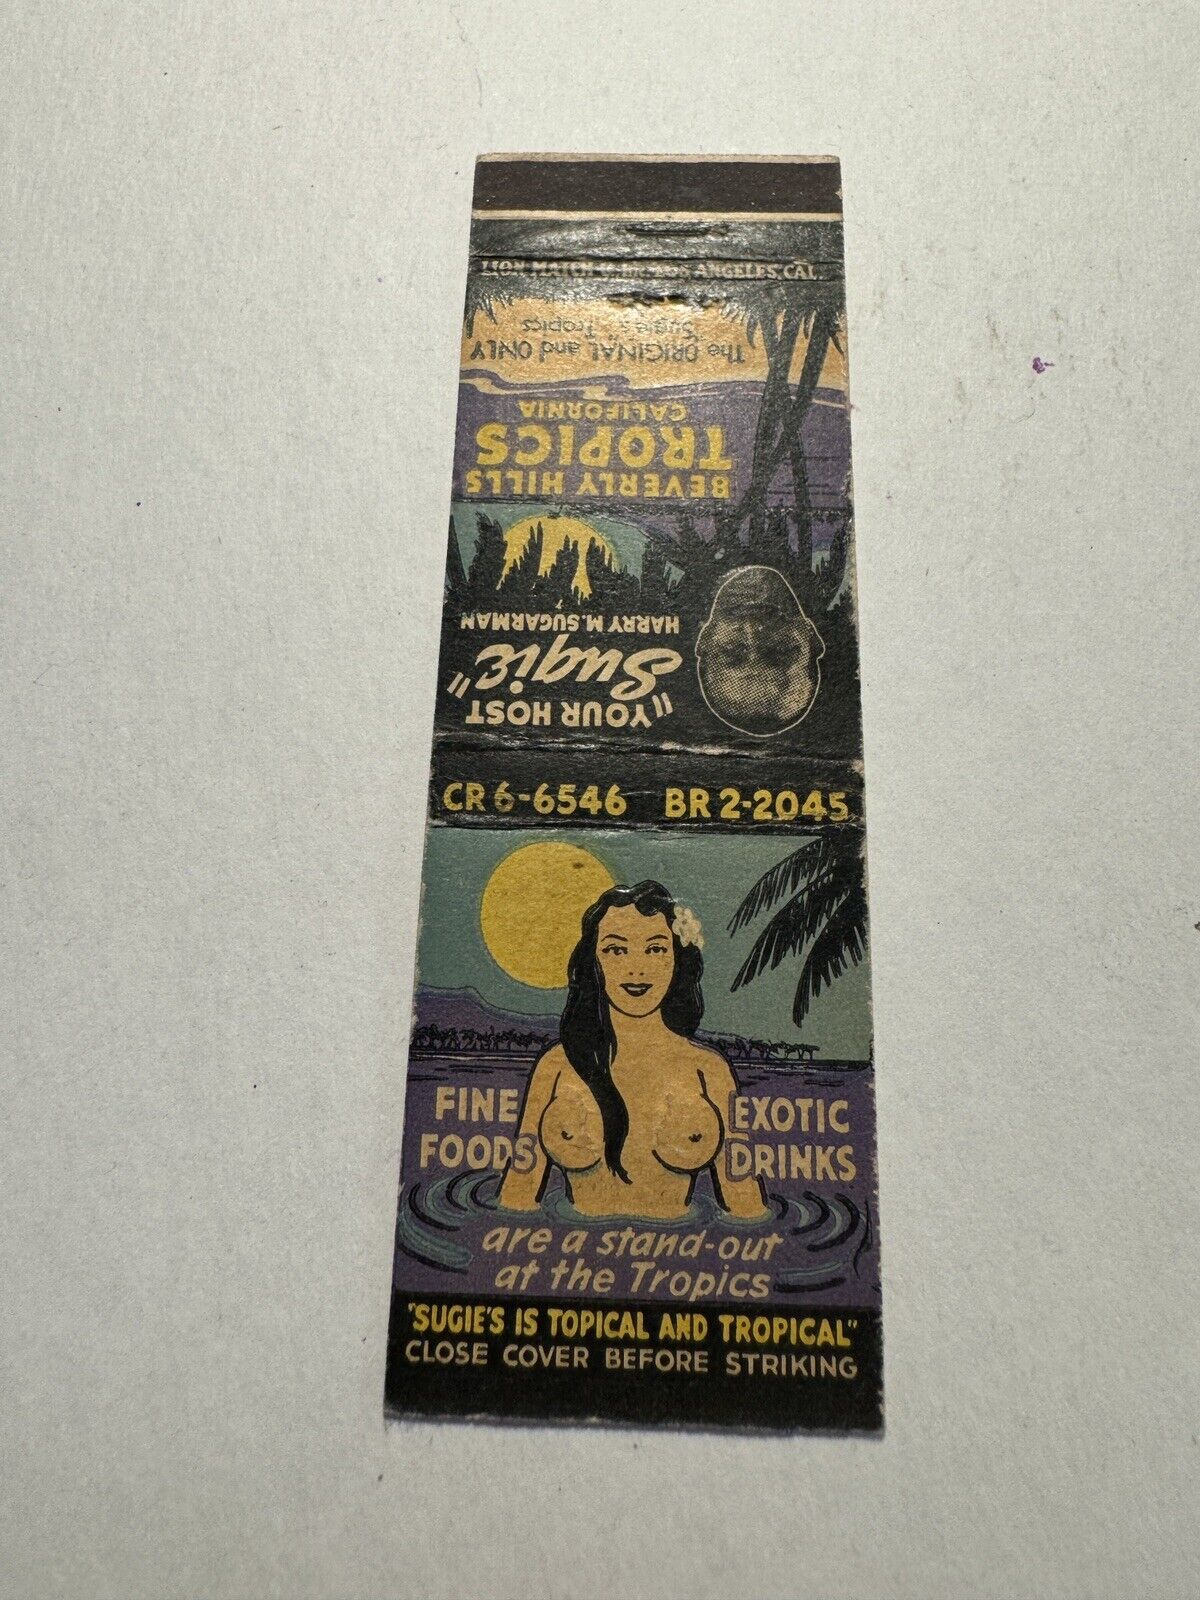 THE TROPICS - Beverly Hills - Nude Hula Girl Advertising Matchbook Cover